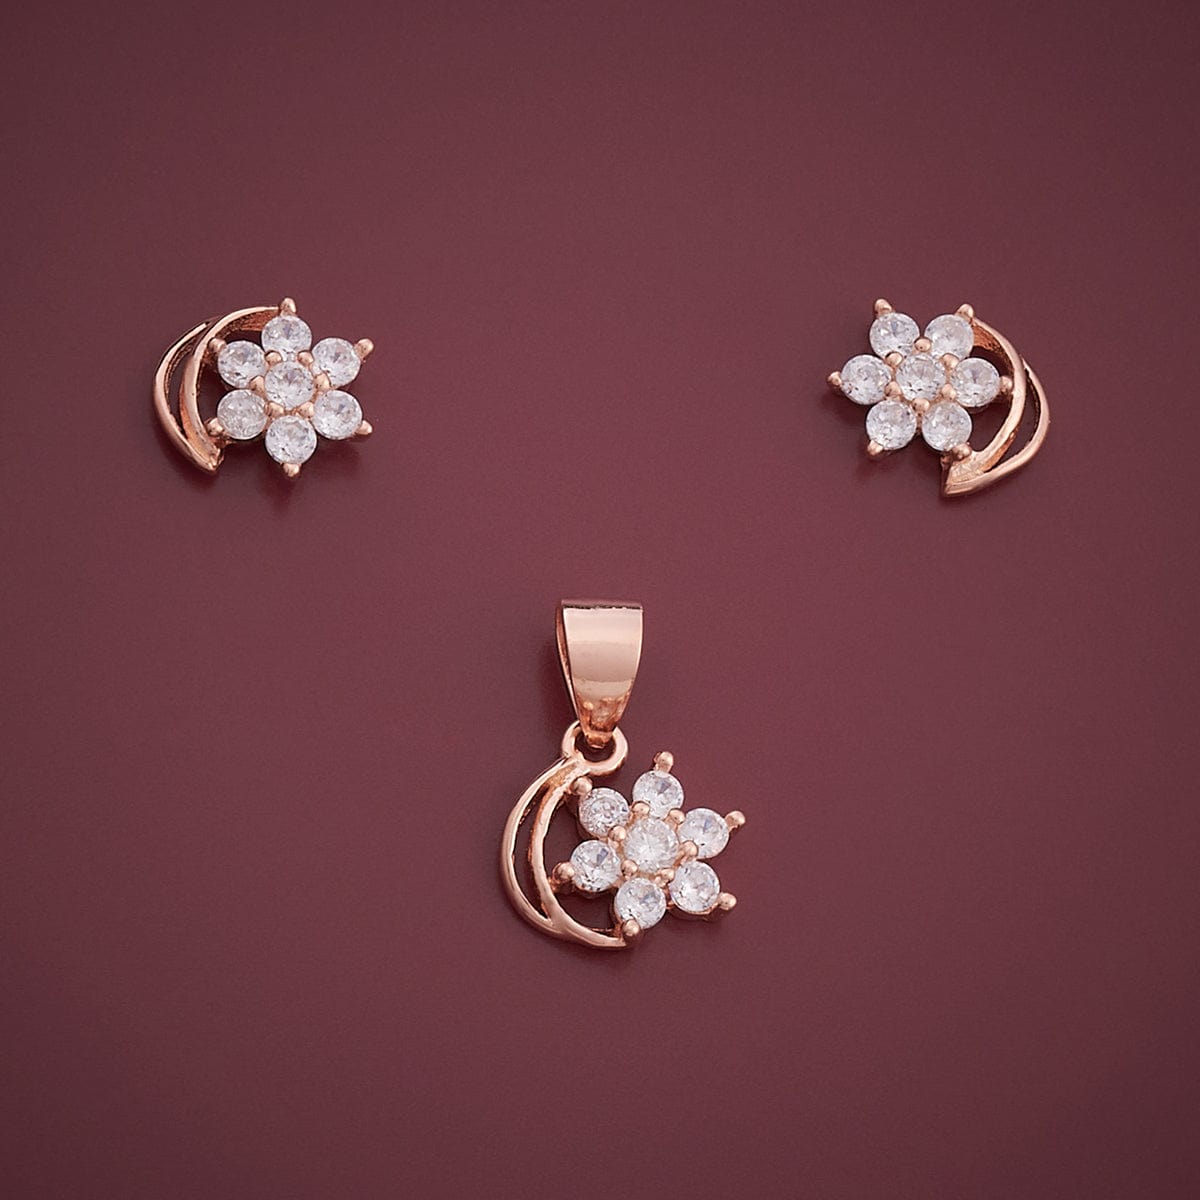 Buy quality Rose gold fancy flower design pendant with earrings set in  Ahmedabad